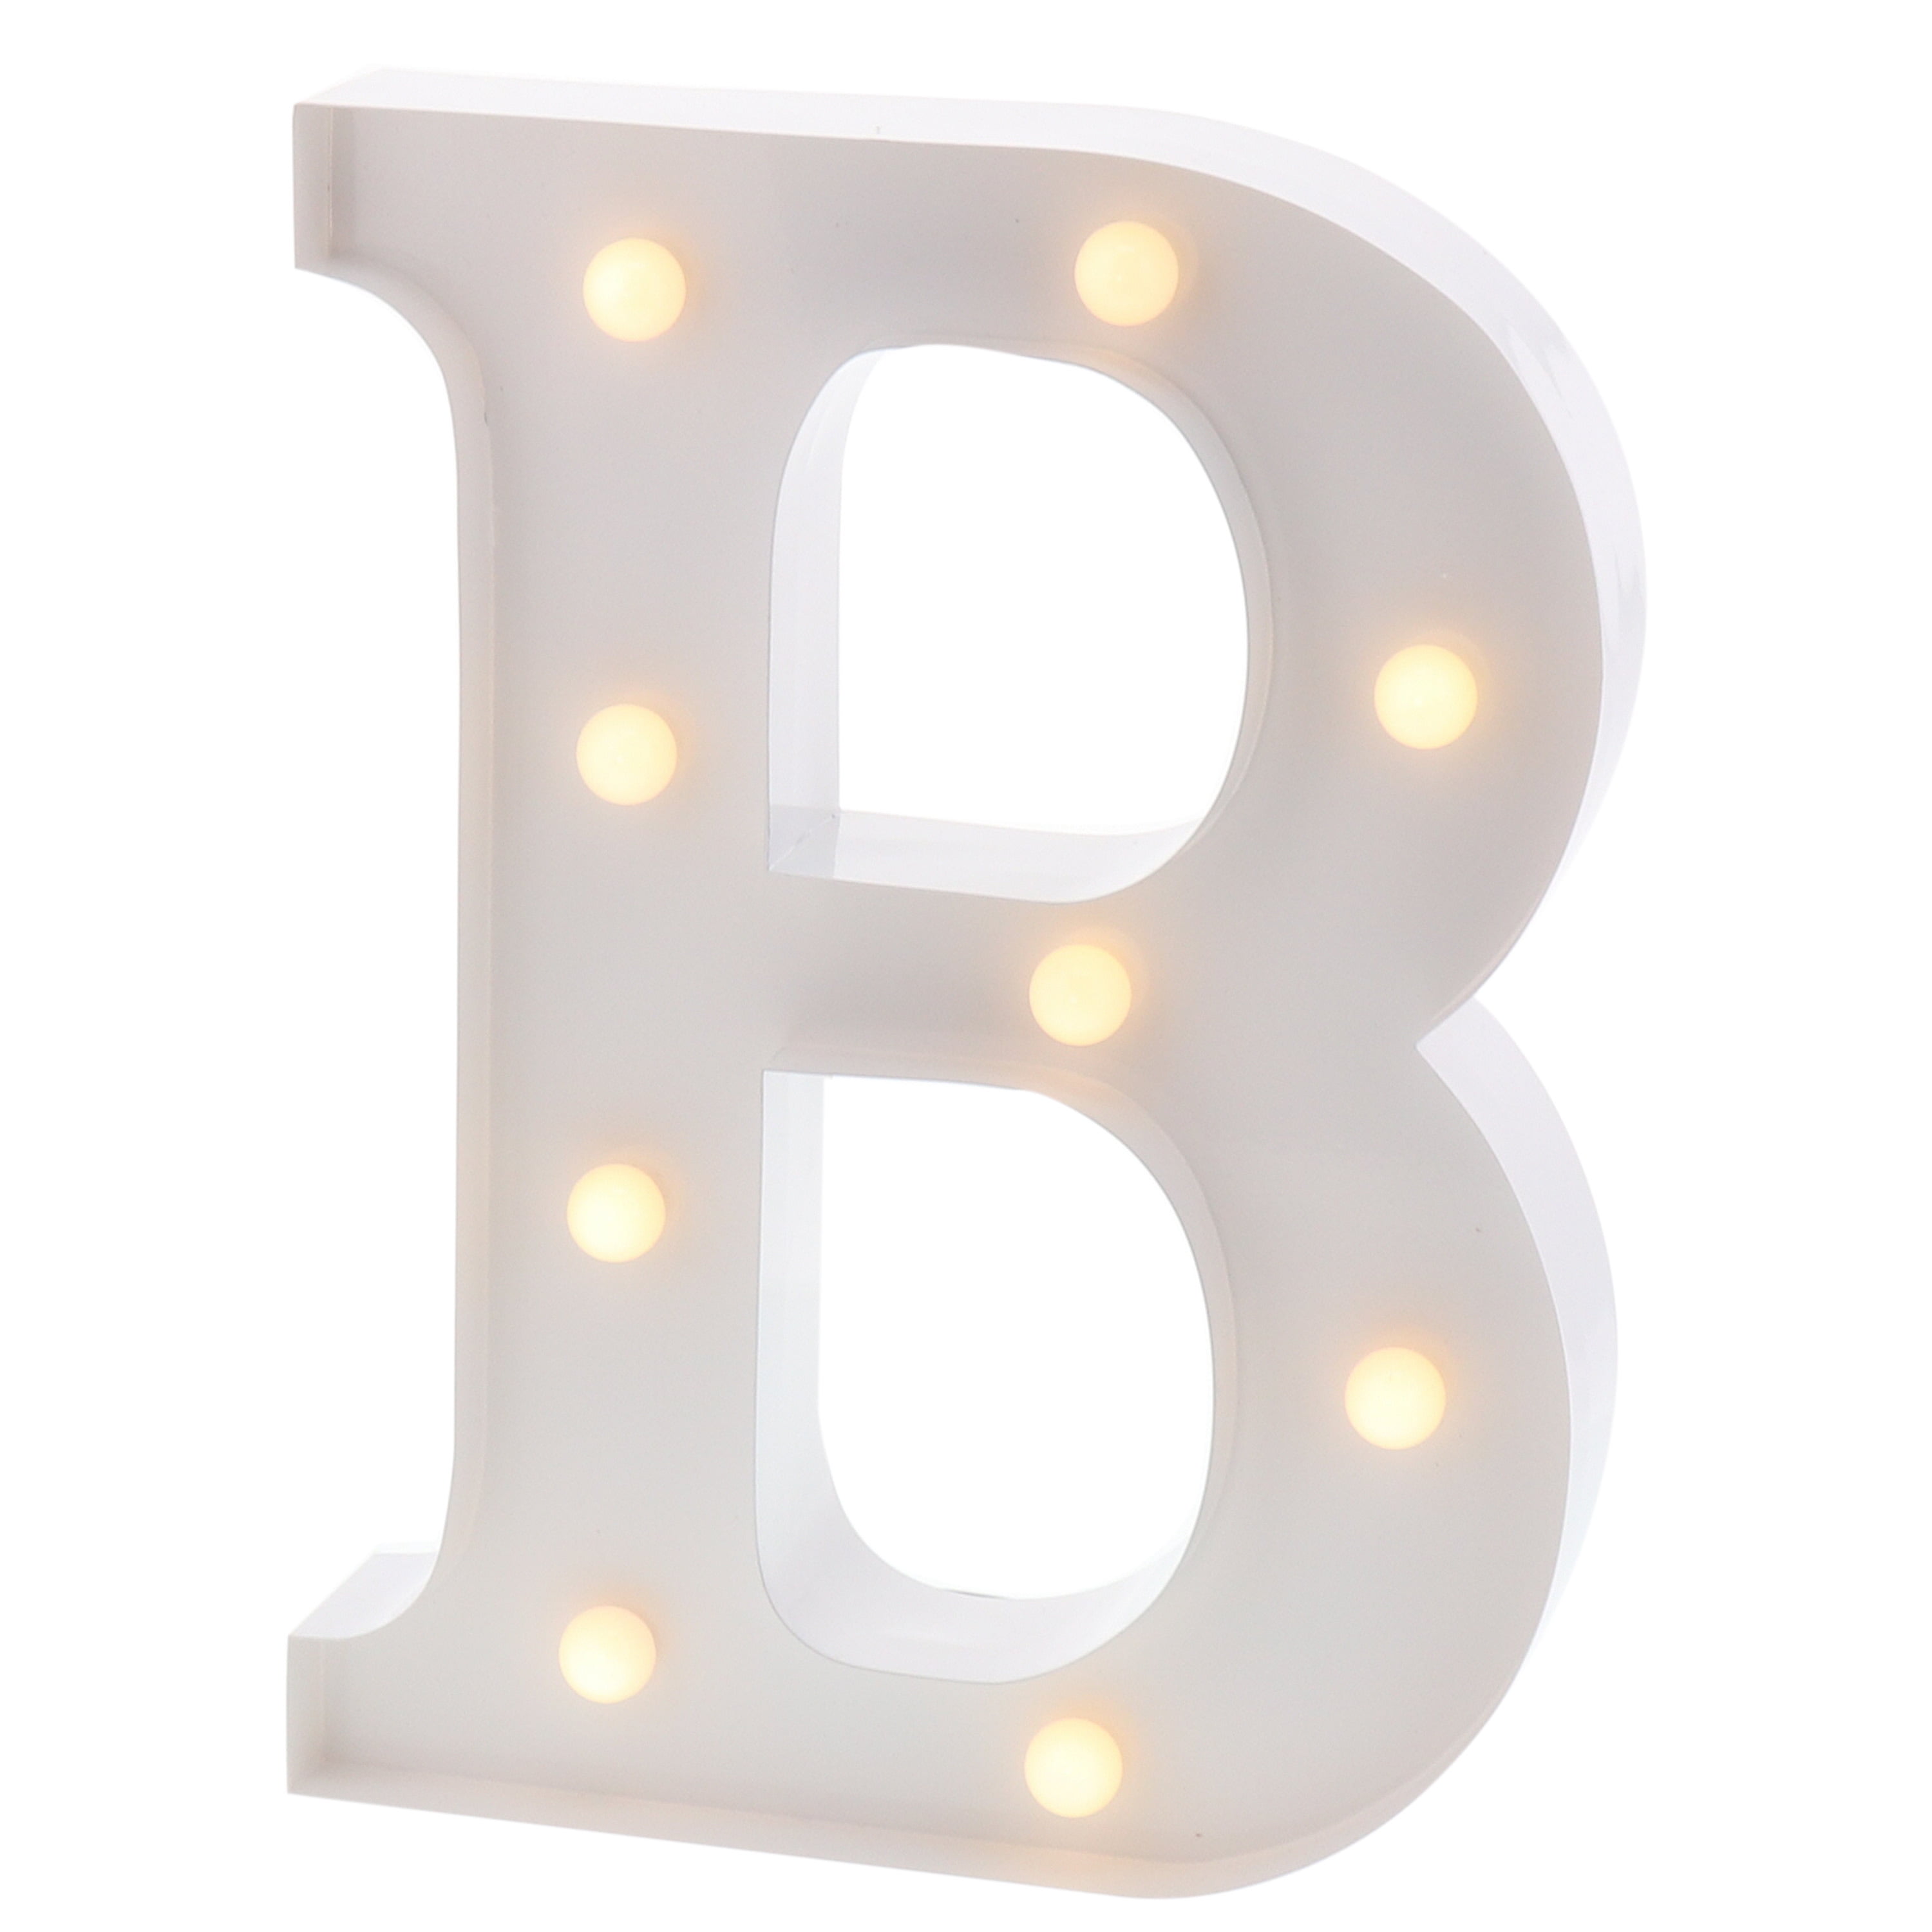 Barnyard Designs Metal Marquee Letter B Light Up Wall Initial Wedding, Bar,  Home and Nursery Letter Decoration 12” (White)